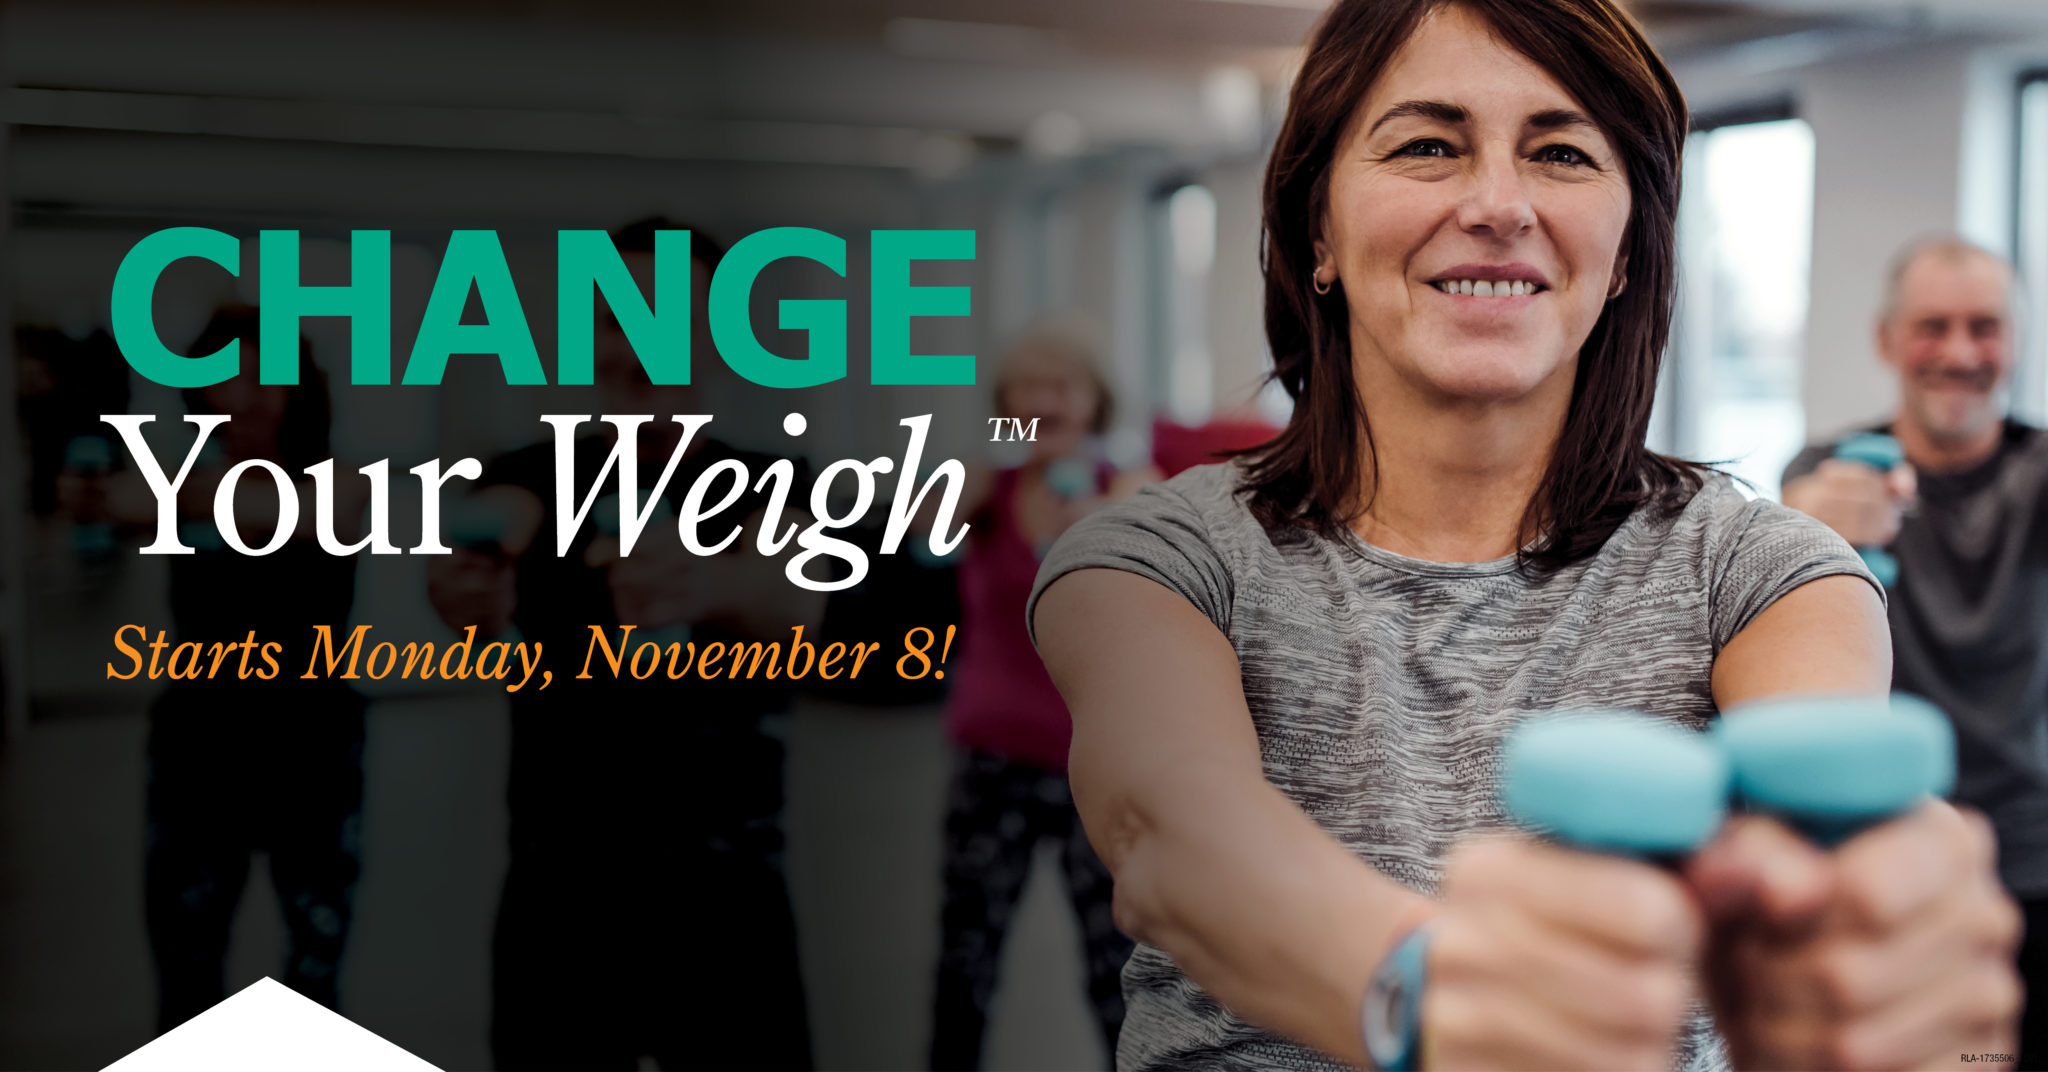 Change your weigh